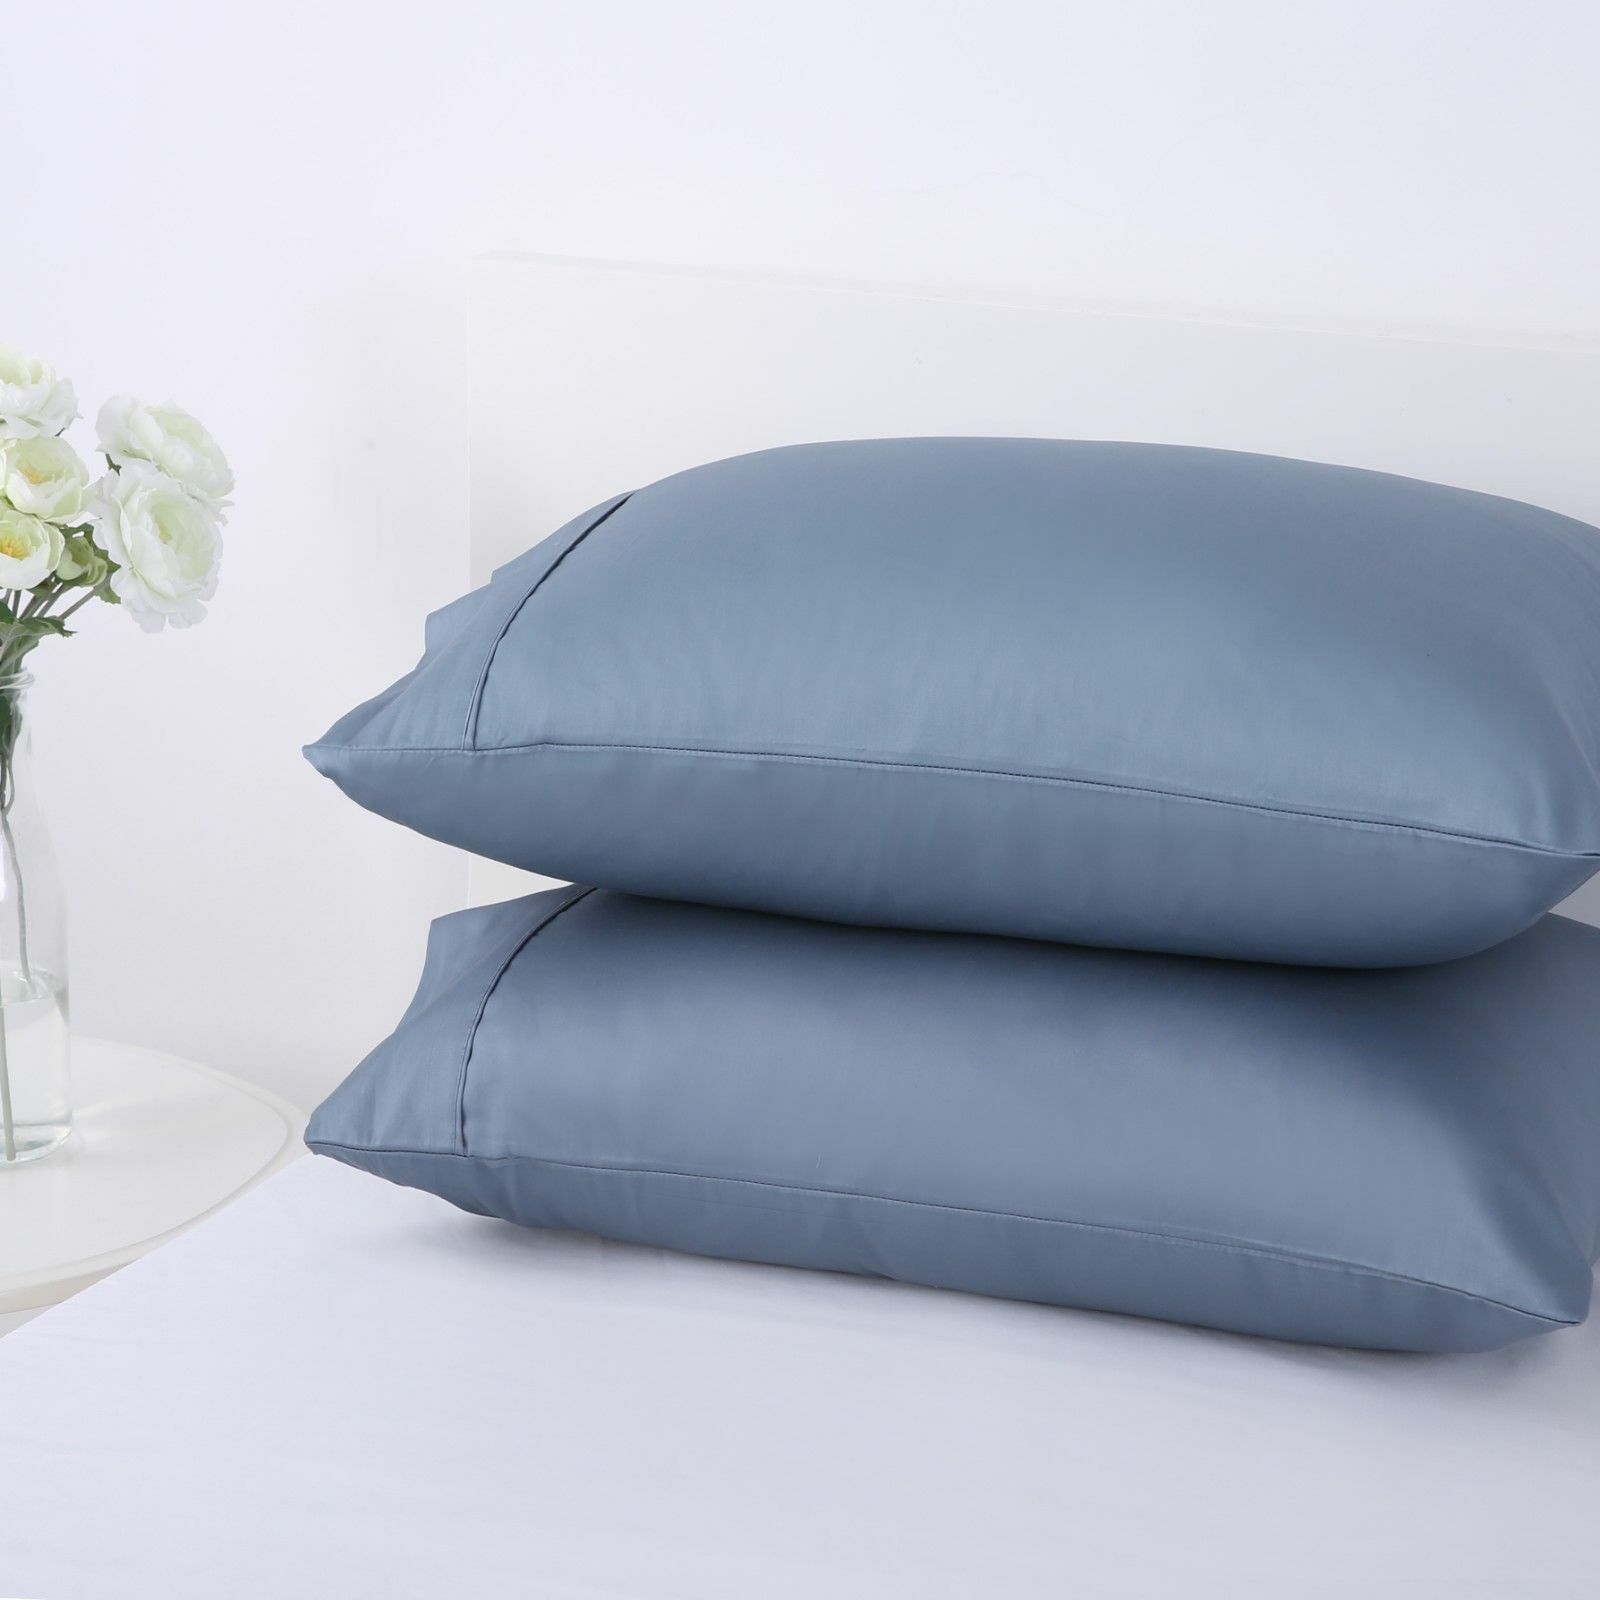 Choosing the Right Pillow According to Your Demands